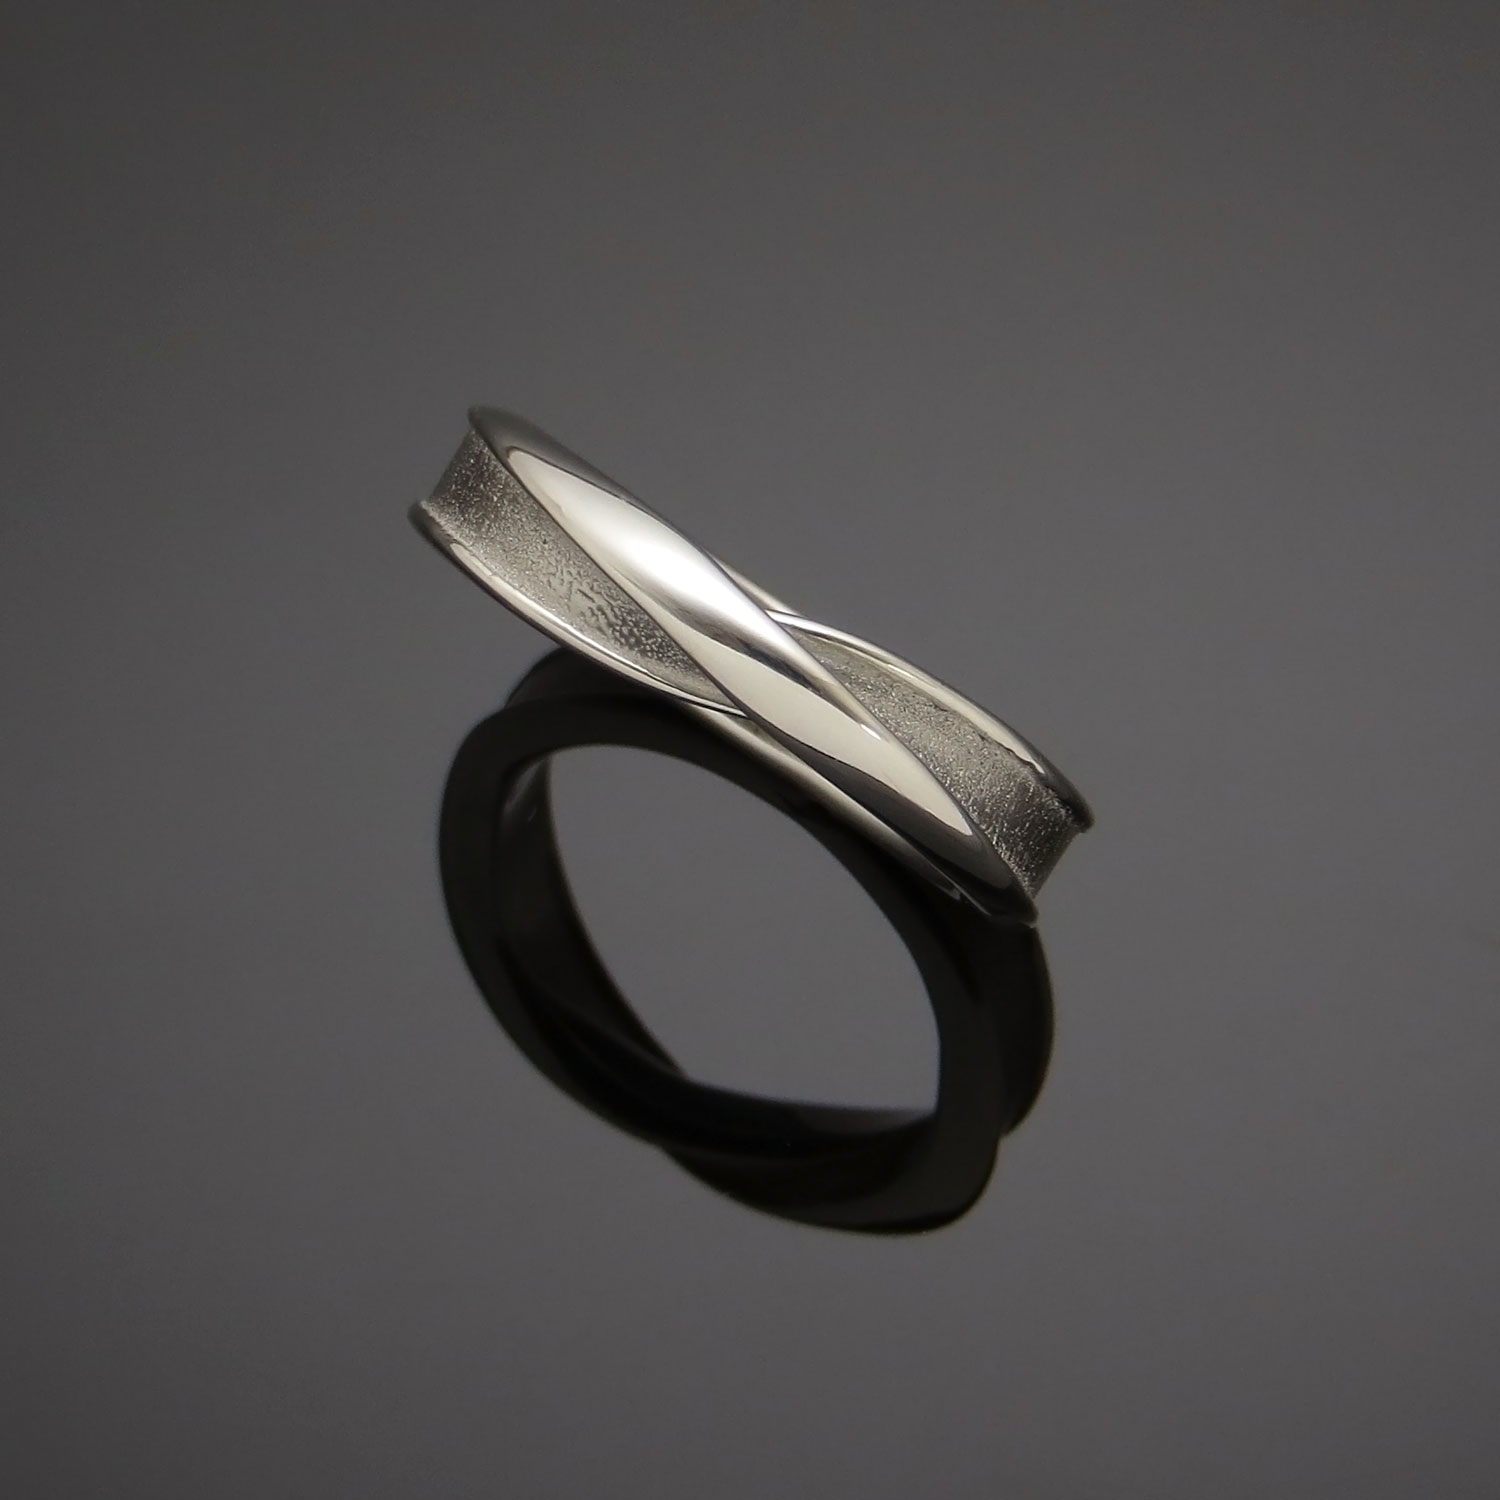 #2007 Mobius Sand Wedding Band, wide — Narrow House Metals